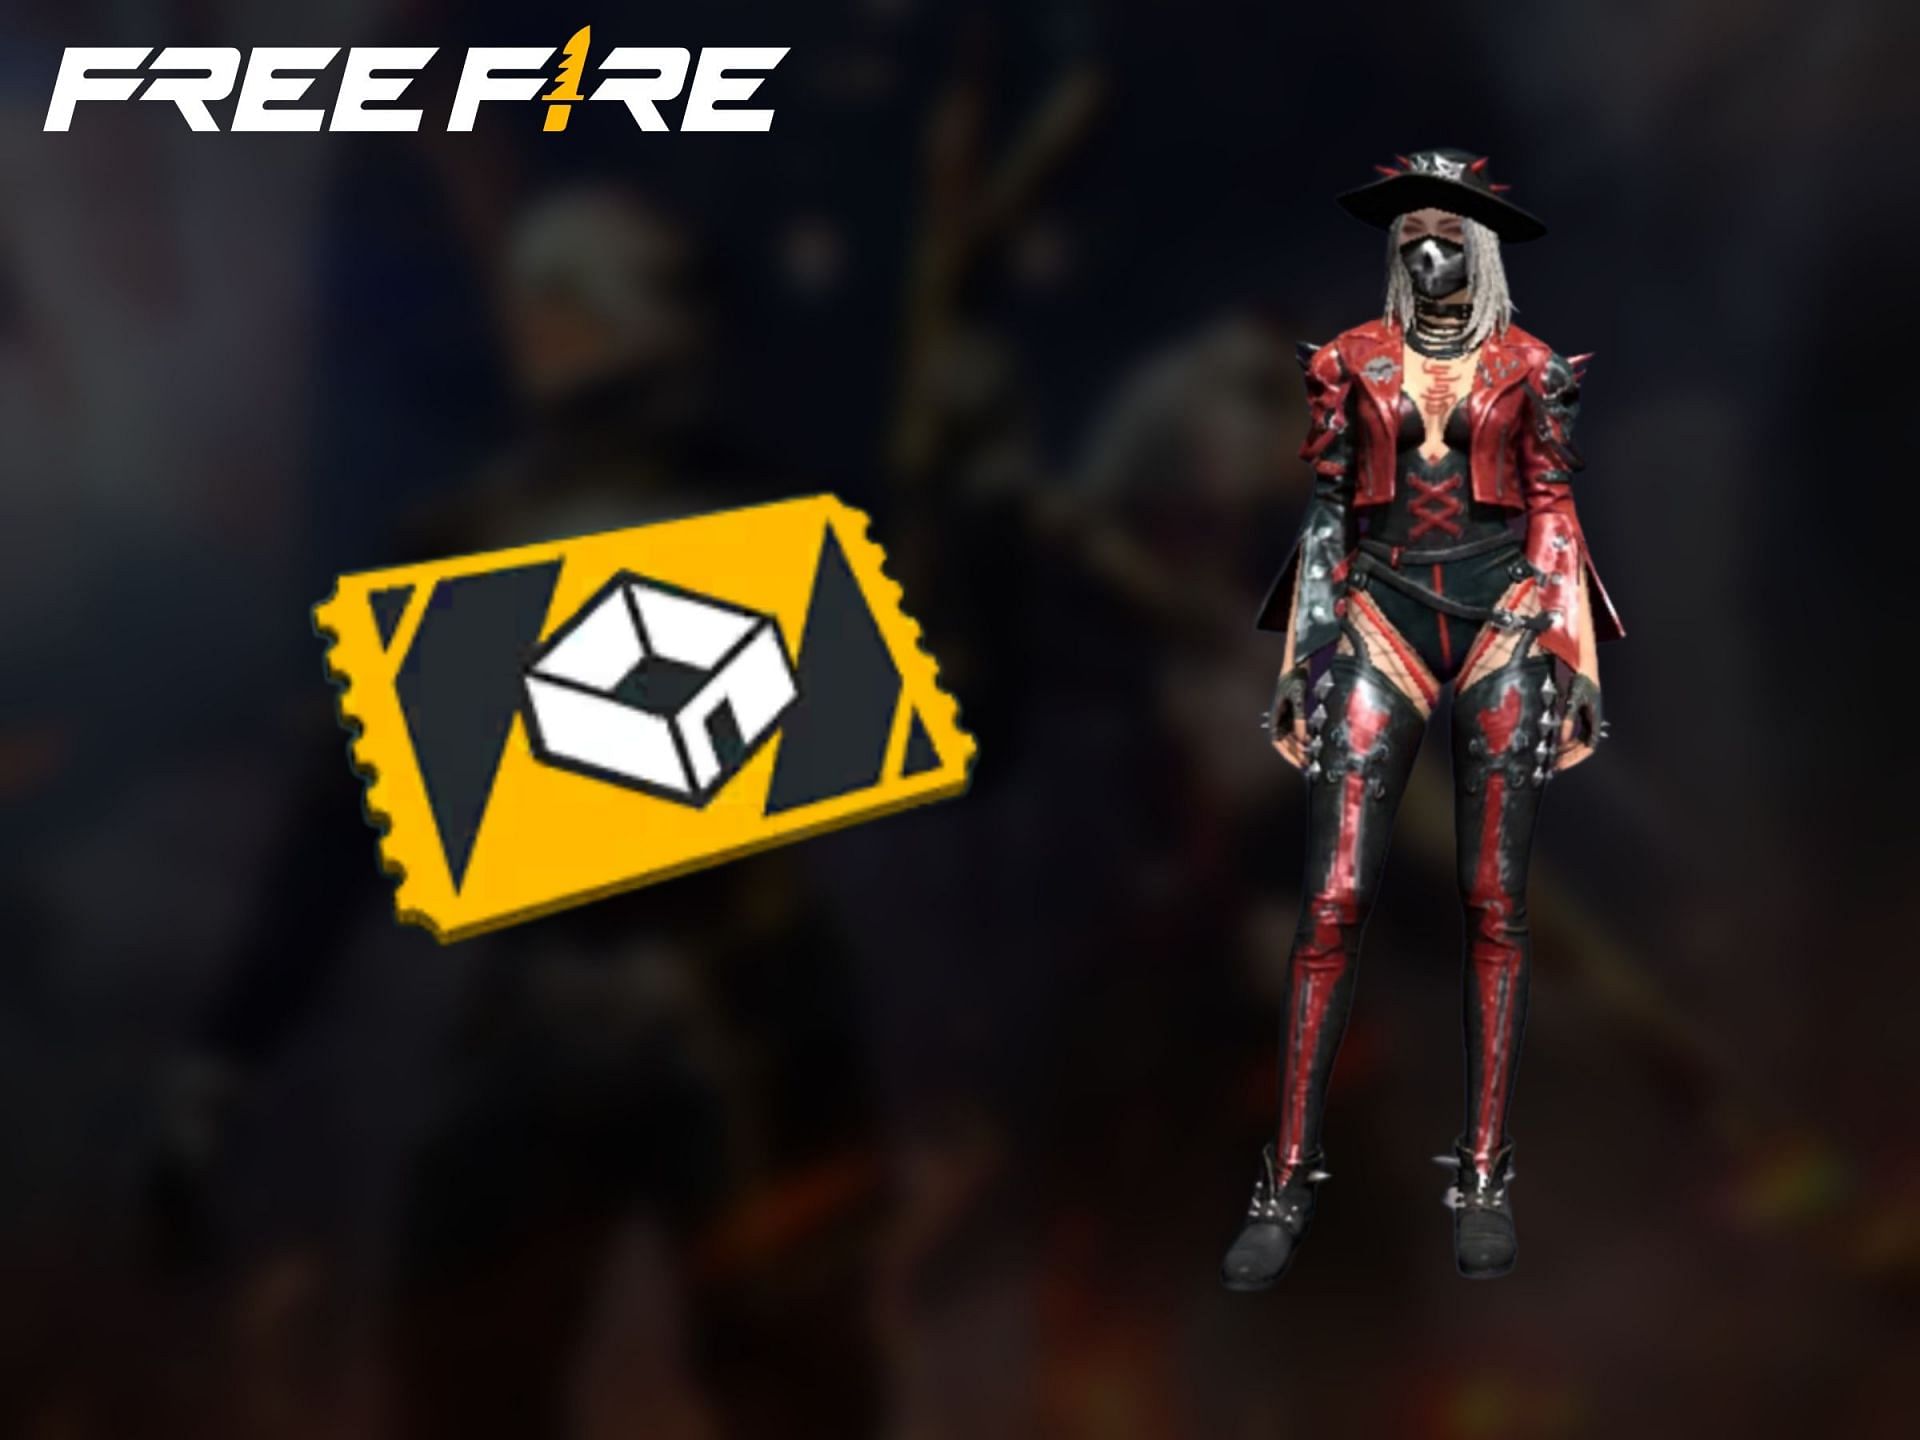 You may acquire free room cards and costume bundles through the following redeem codes (Image via Sportskeeda)